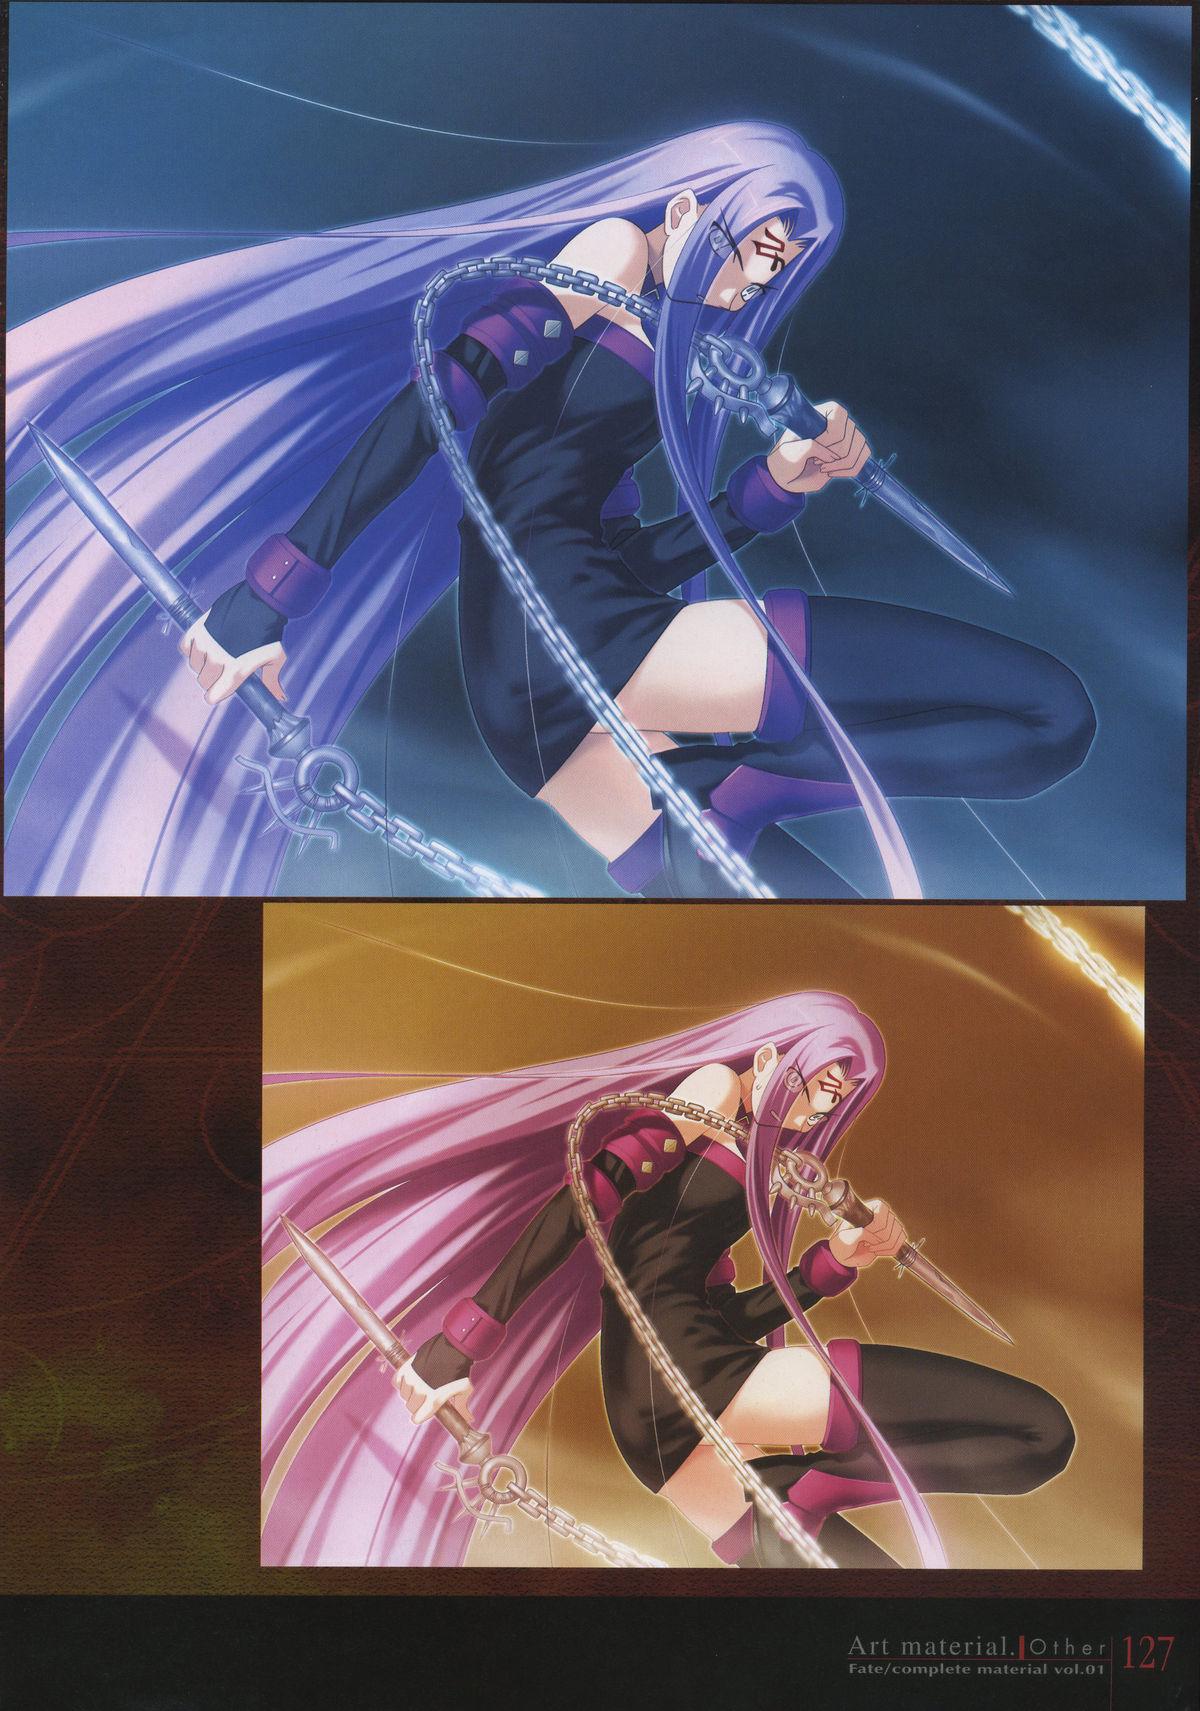 Fate/complete material I - Art material. 131